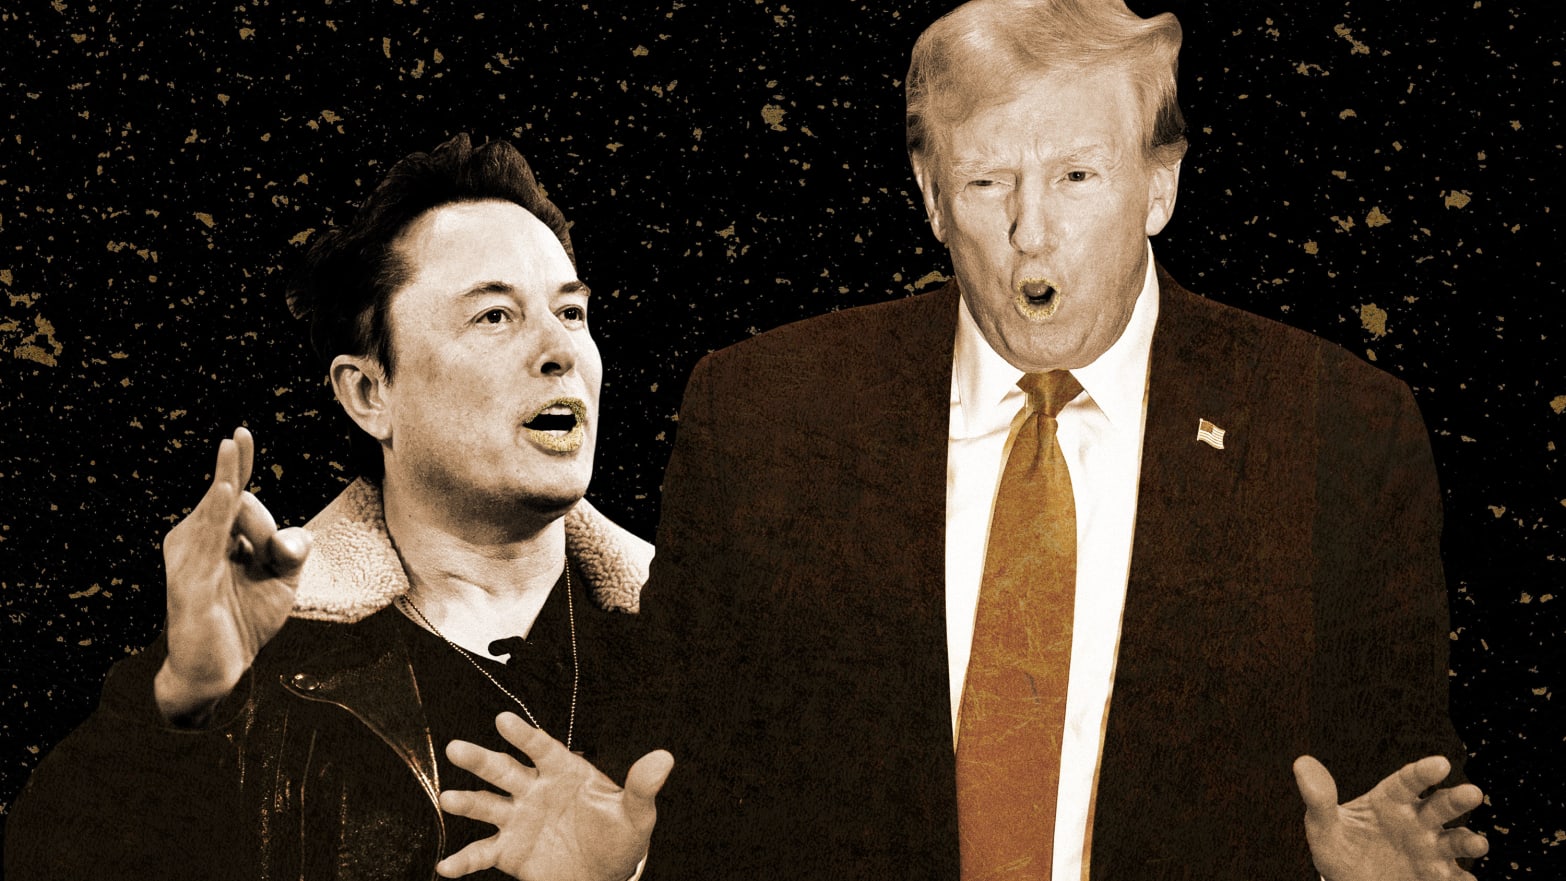 A photo illustration showing Elon Musk and Donald Trump.